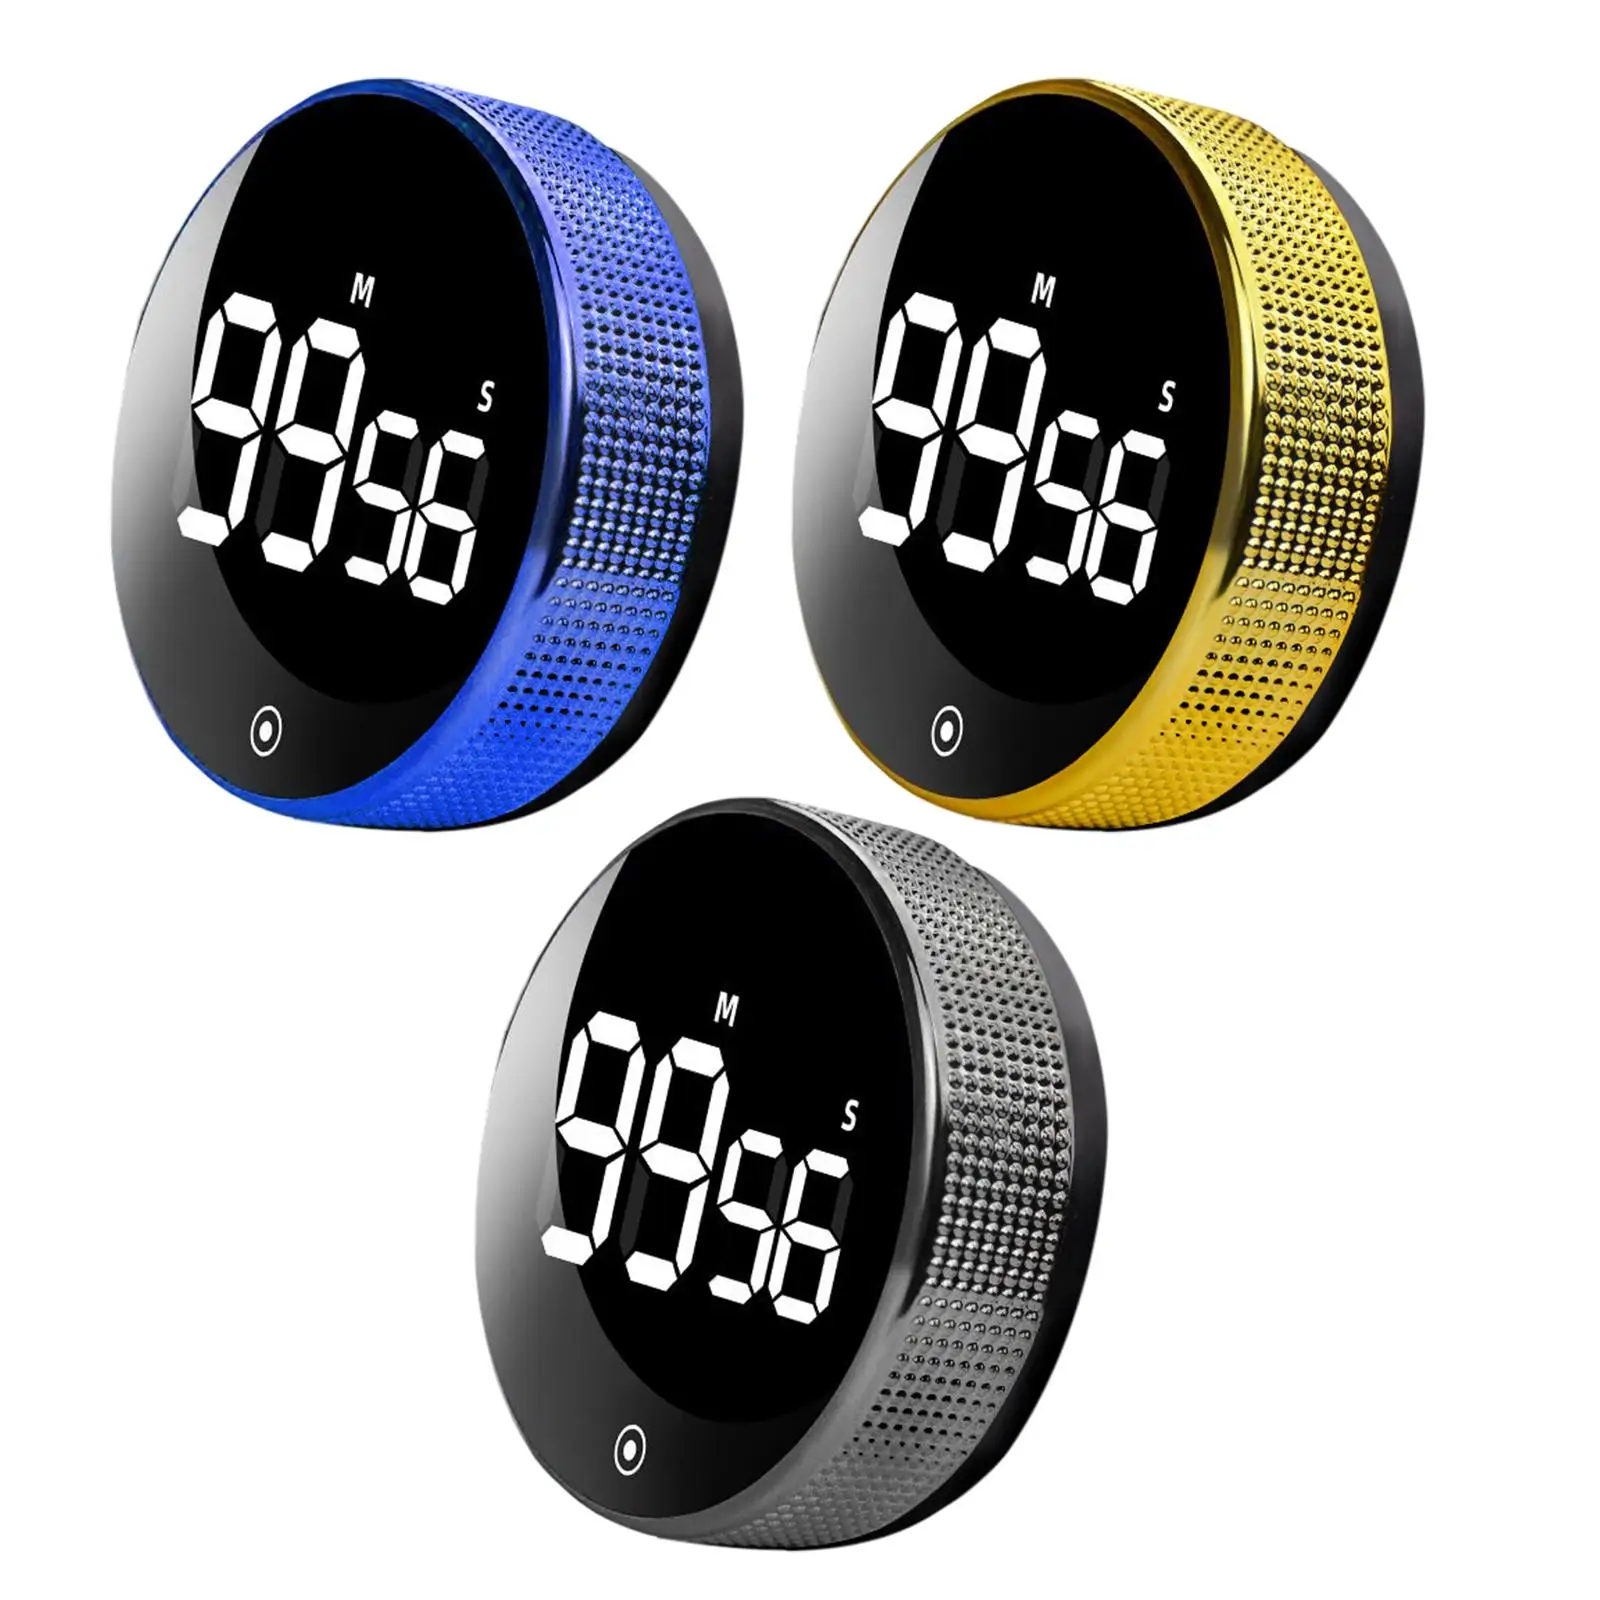 Round Digital Kitchen Timer Magnetic Attraction Count Down Silent Alarm Clock Desktop Table Clock for Bathroom Adults Teachers